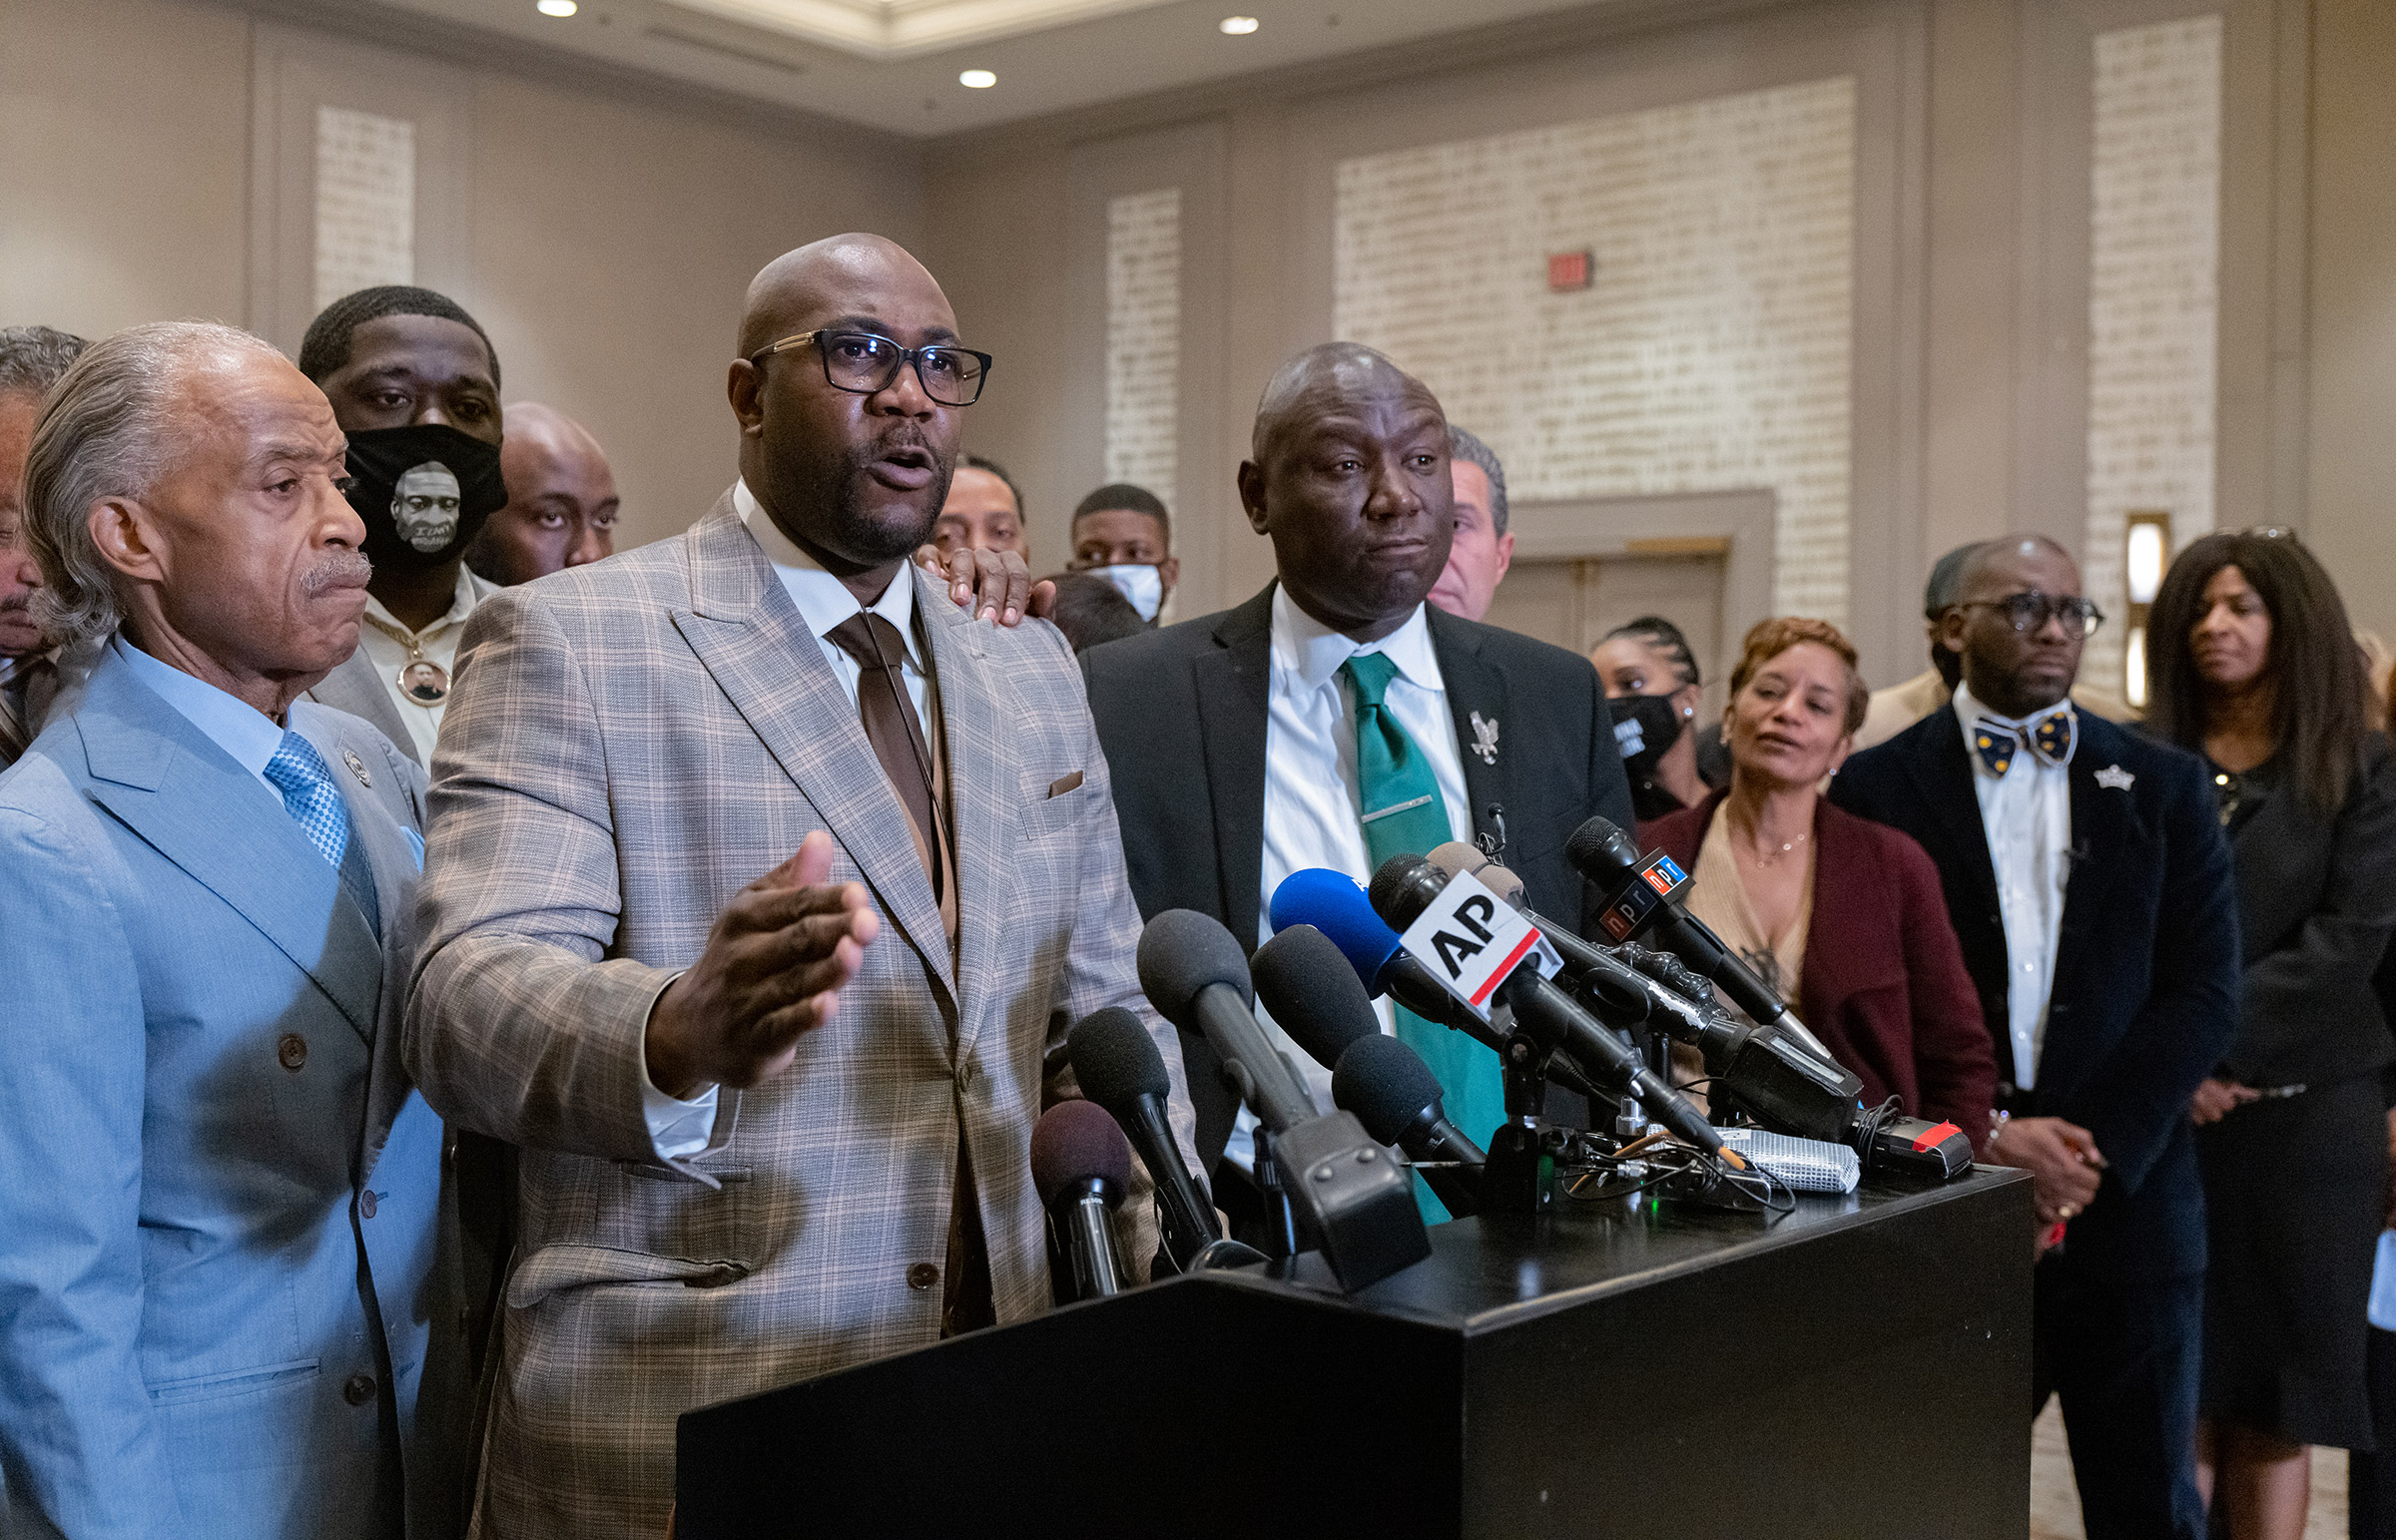 George Floyd's brother Philonise Floyd is flanked by the Rev. Al Sharpton, left, and Attorney Ben Crump during a news conference after the verdicts were announced. (Ruddy Roye for TIME)